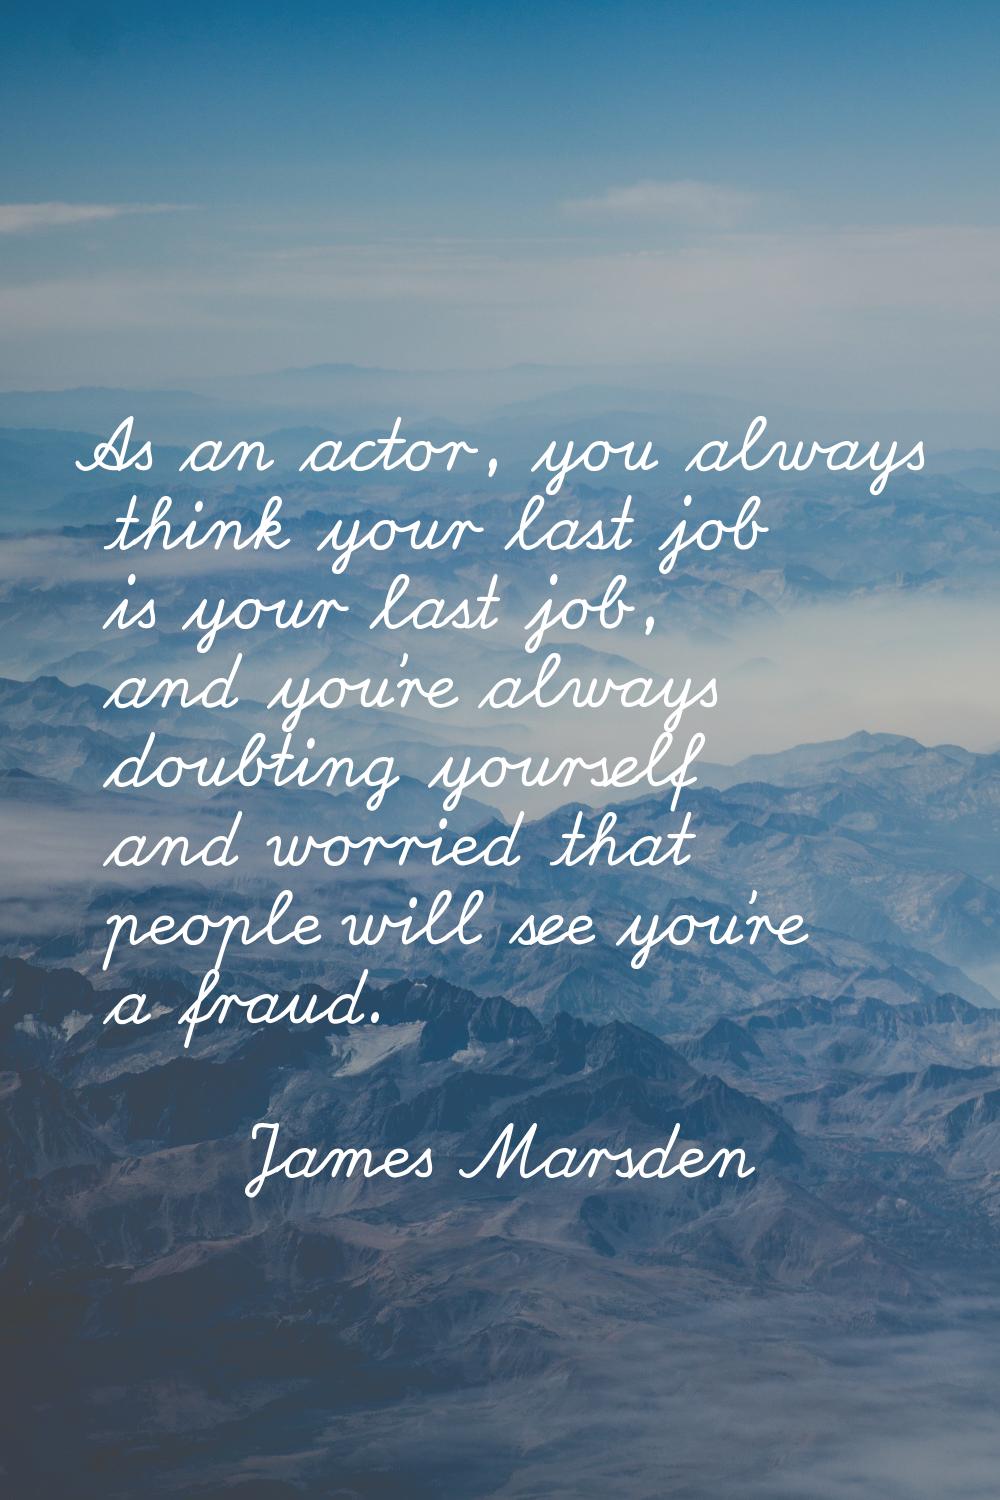 As an actor, you always think your last job is your last job, and you're always doubting yourself a